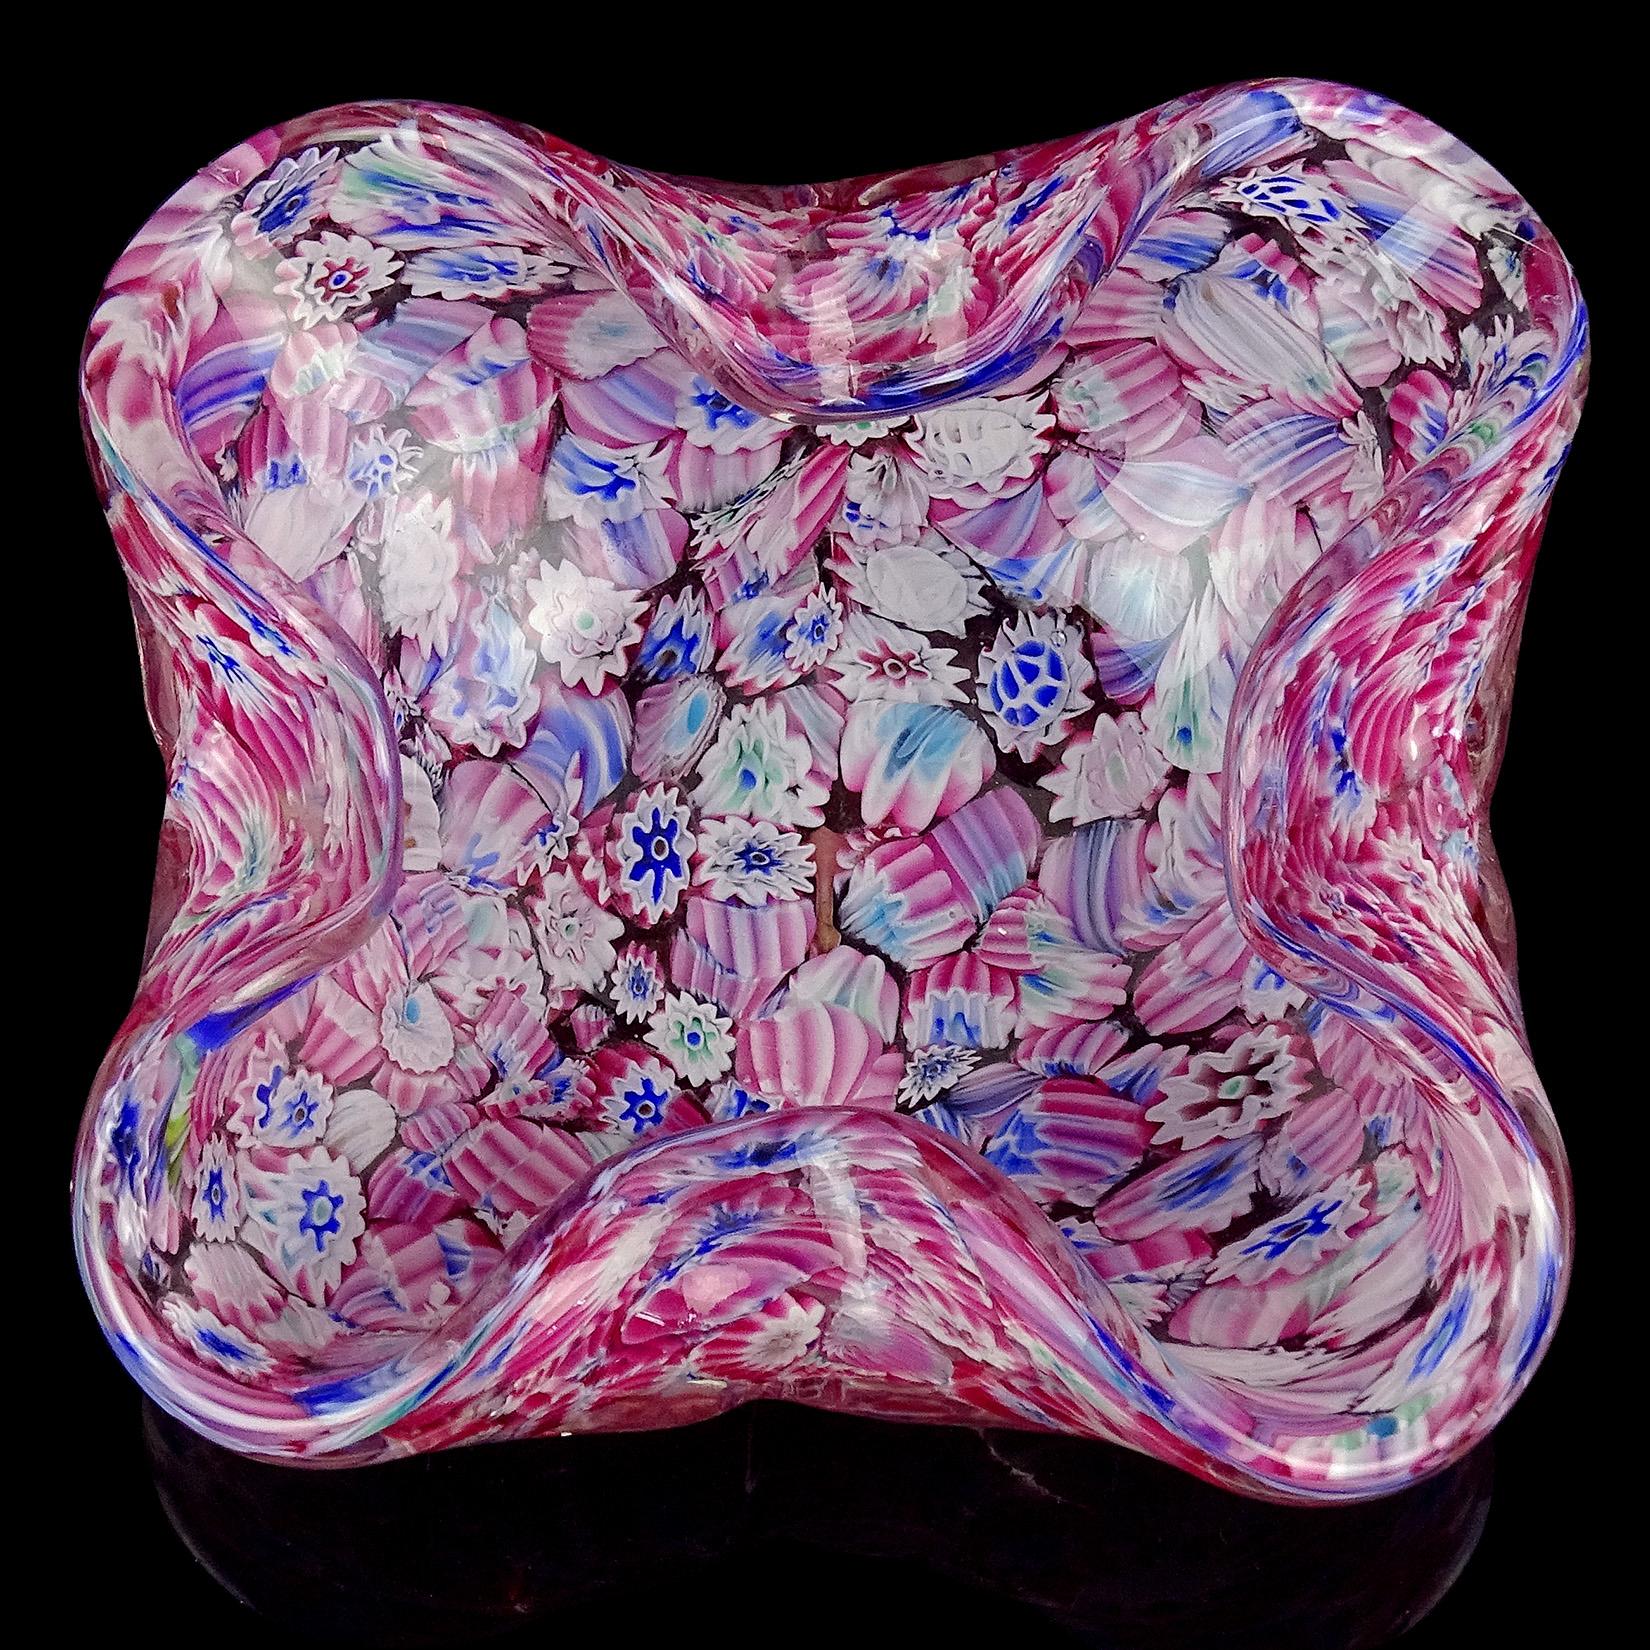 Beautiful vintage Murano hand blown magenta pink, with blue and white millefiori flowers Italian art glass decorative bowl. Attributed to the Fratelli Toso company. The piece has an irregular squared shape, with folds at the edges. The mosaic flower